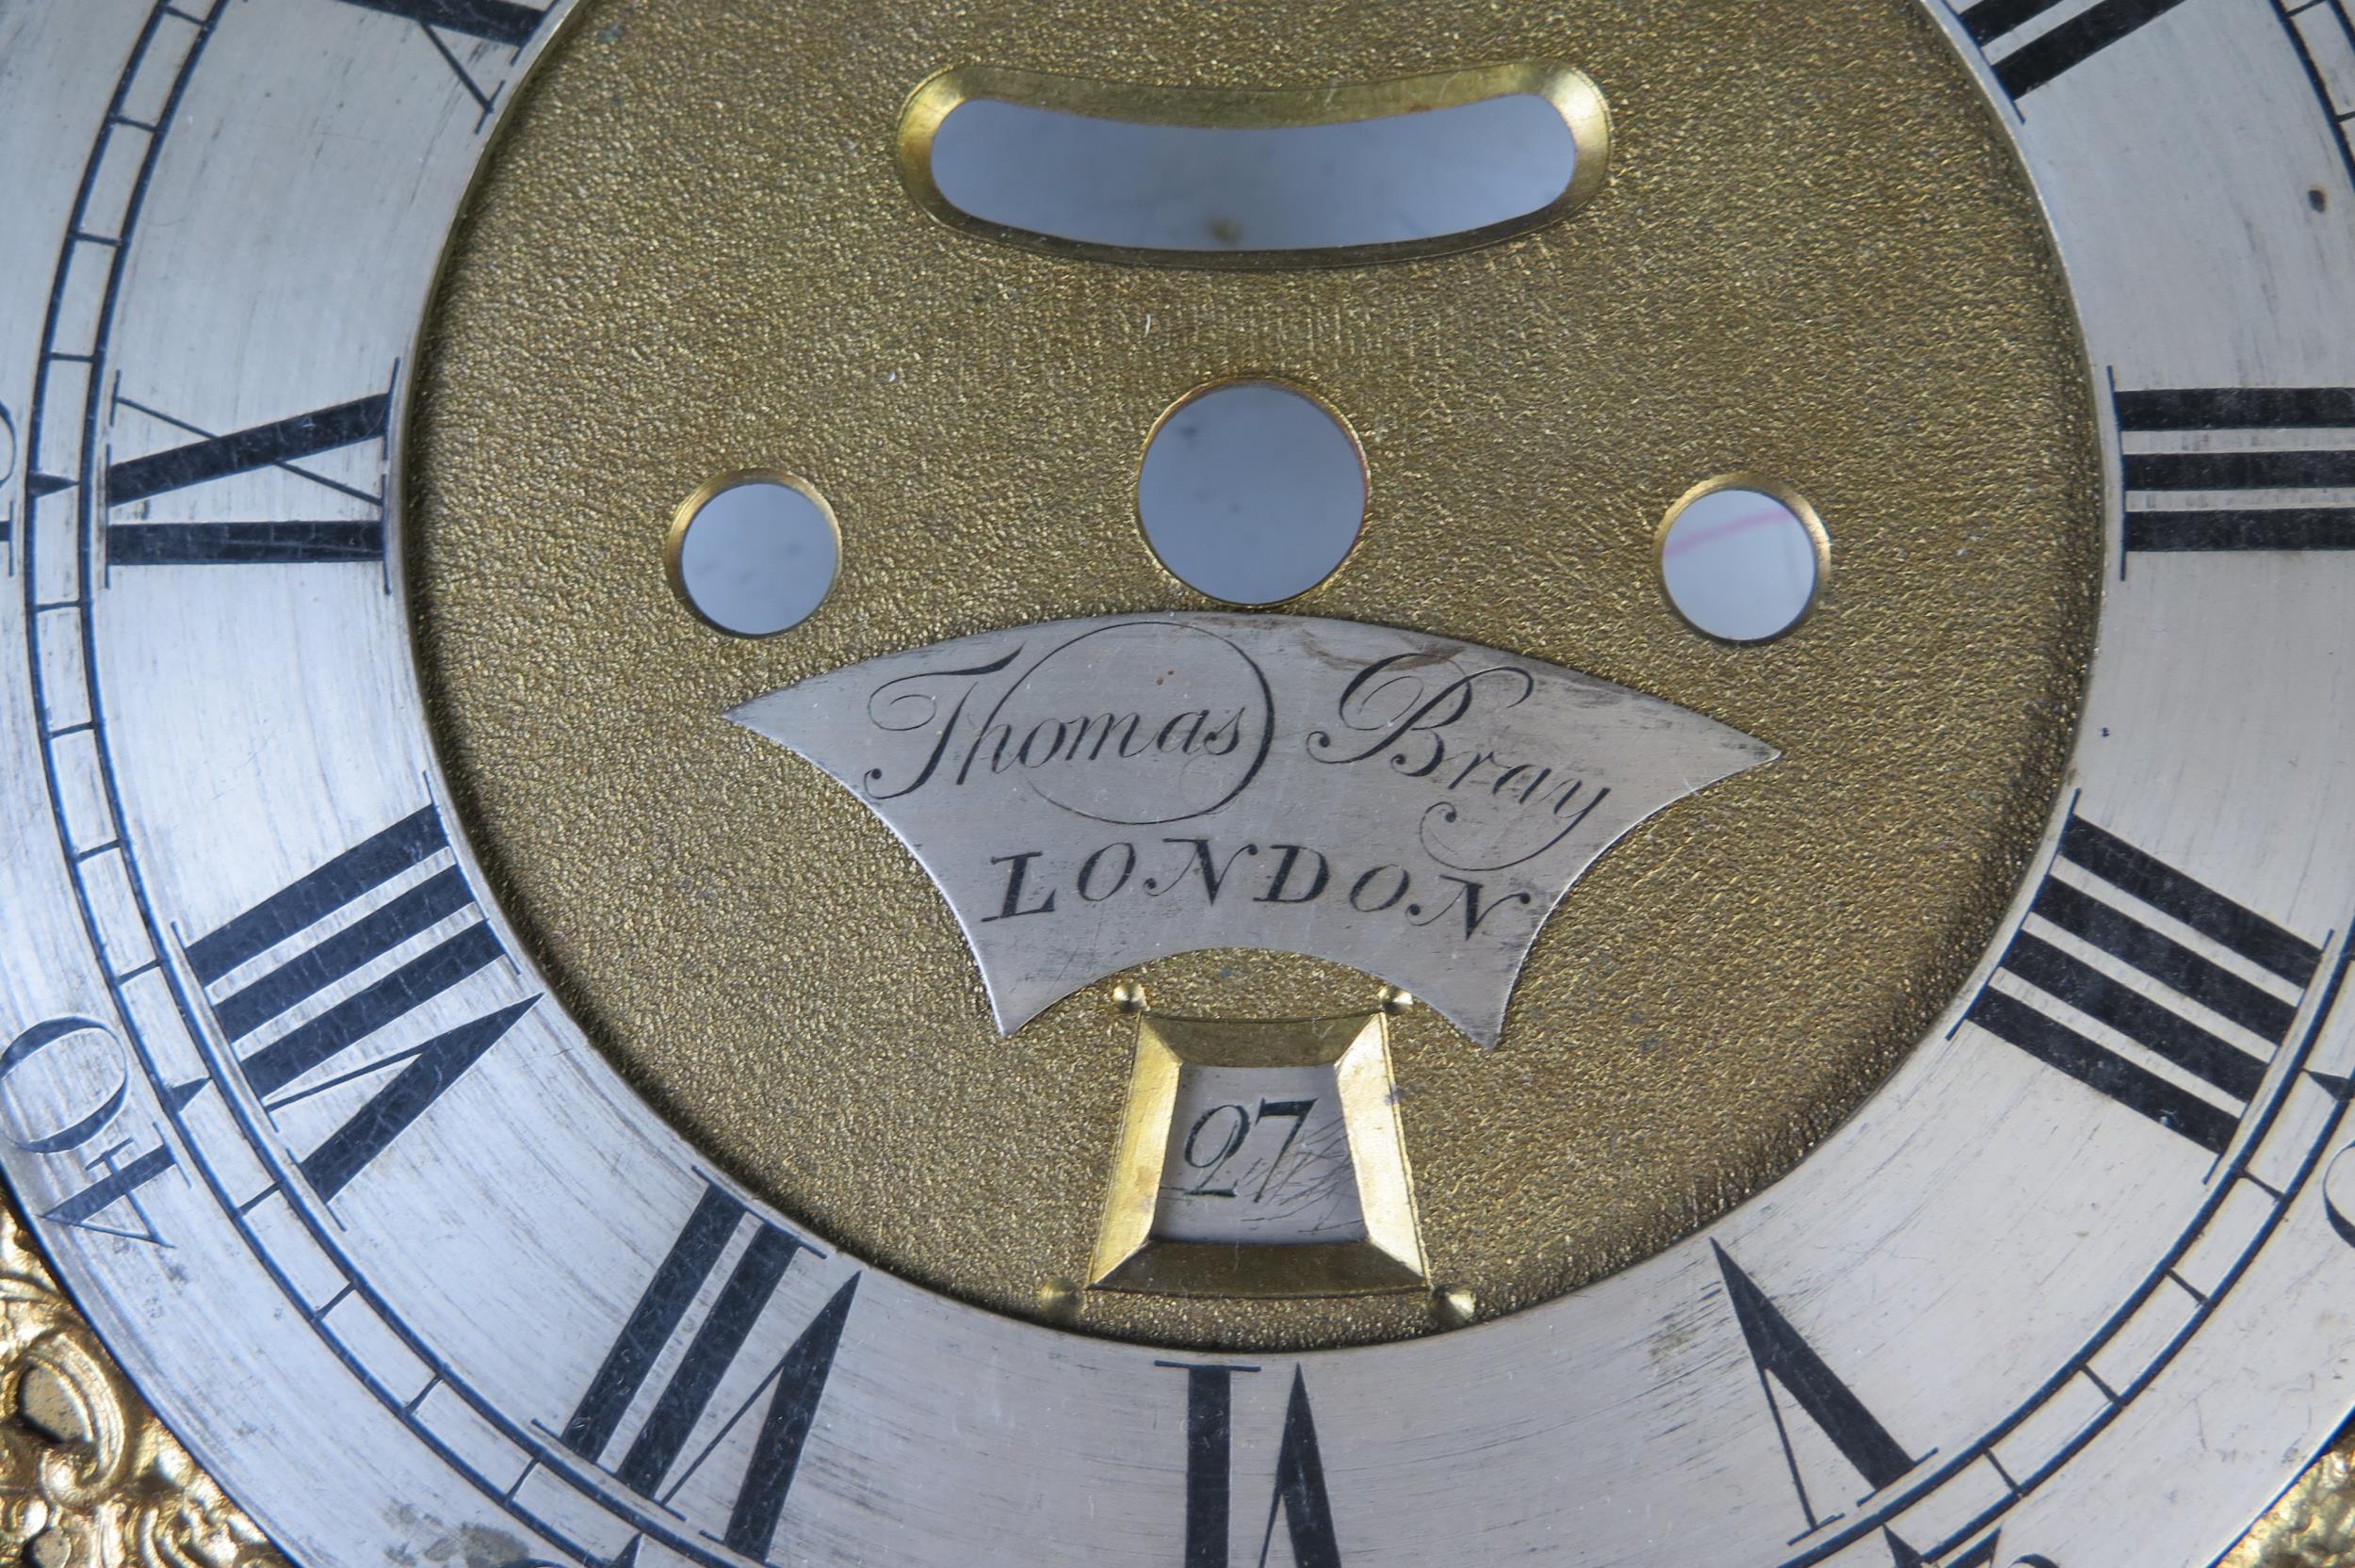 Thomas Bray, London, a mid 18th century ebonised bracket clock, the case with inverted bell top - Image 3 of 10